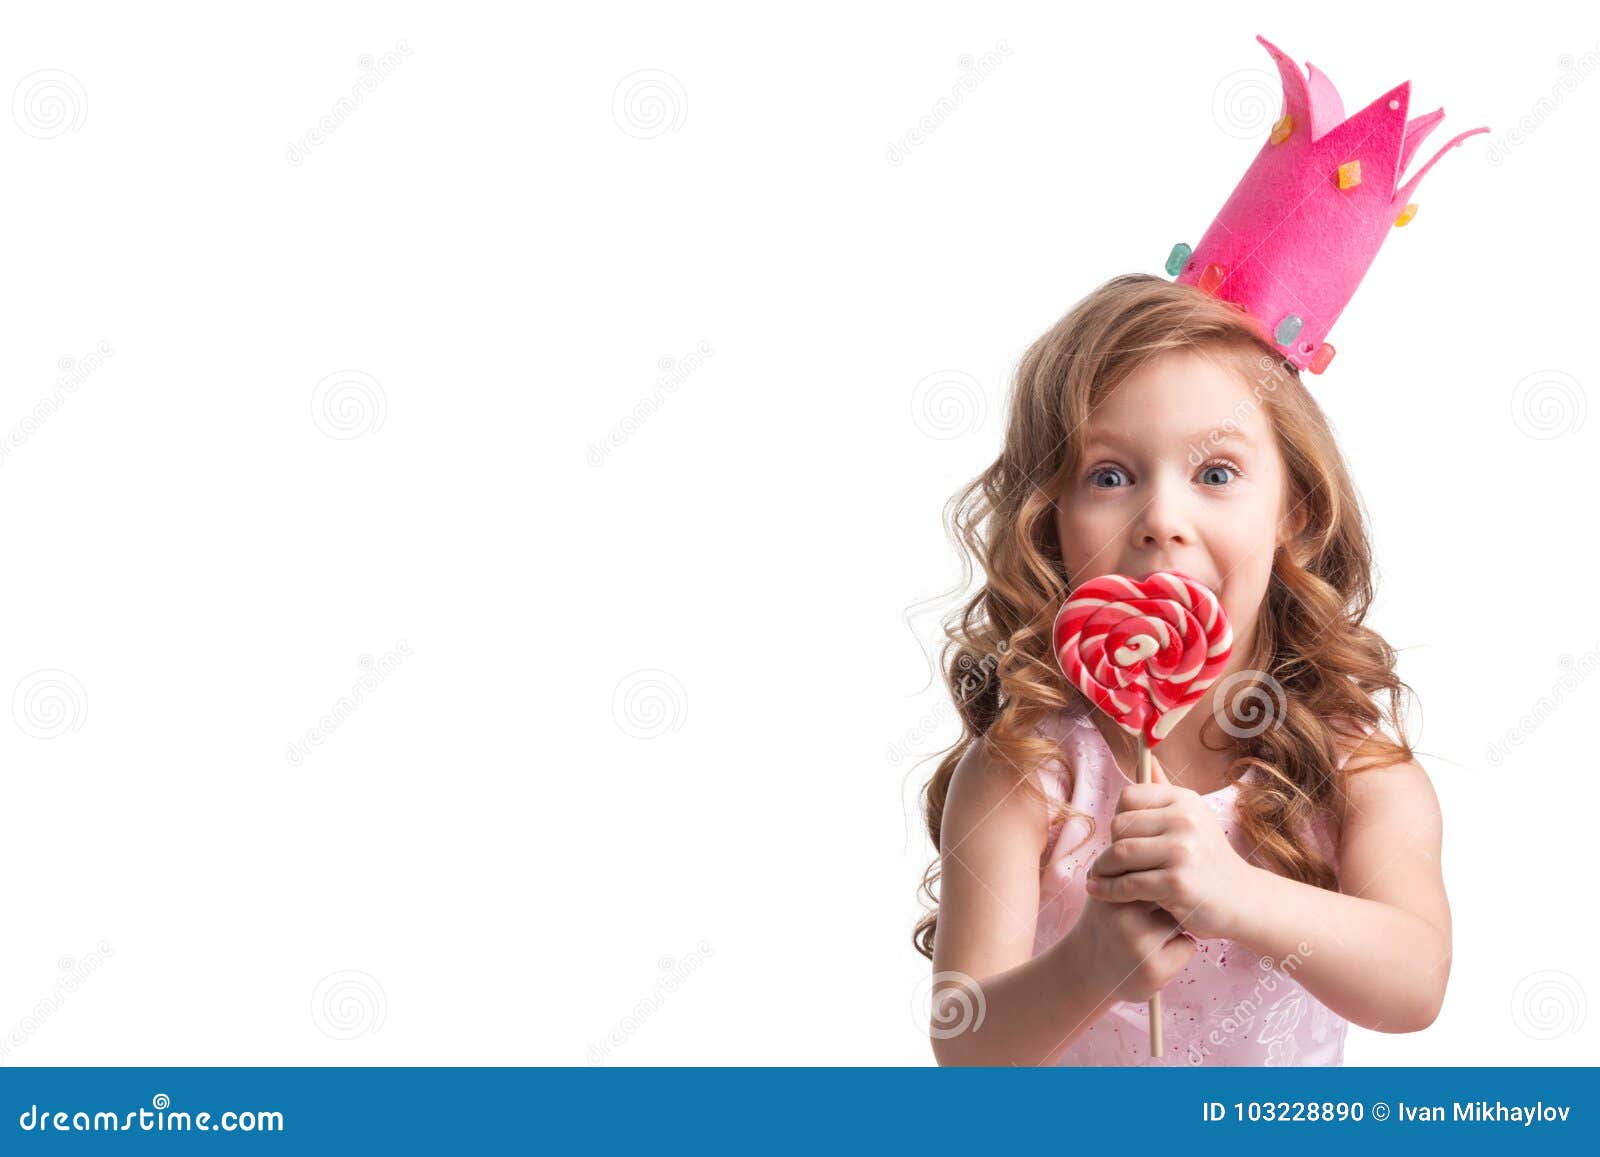 Little candy princess stock photo. Image of sugar, pink - 103228890